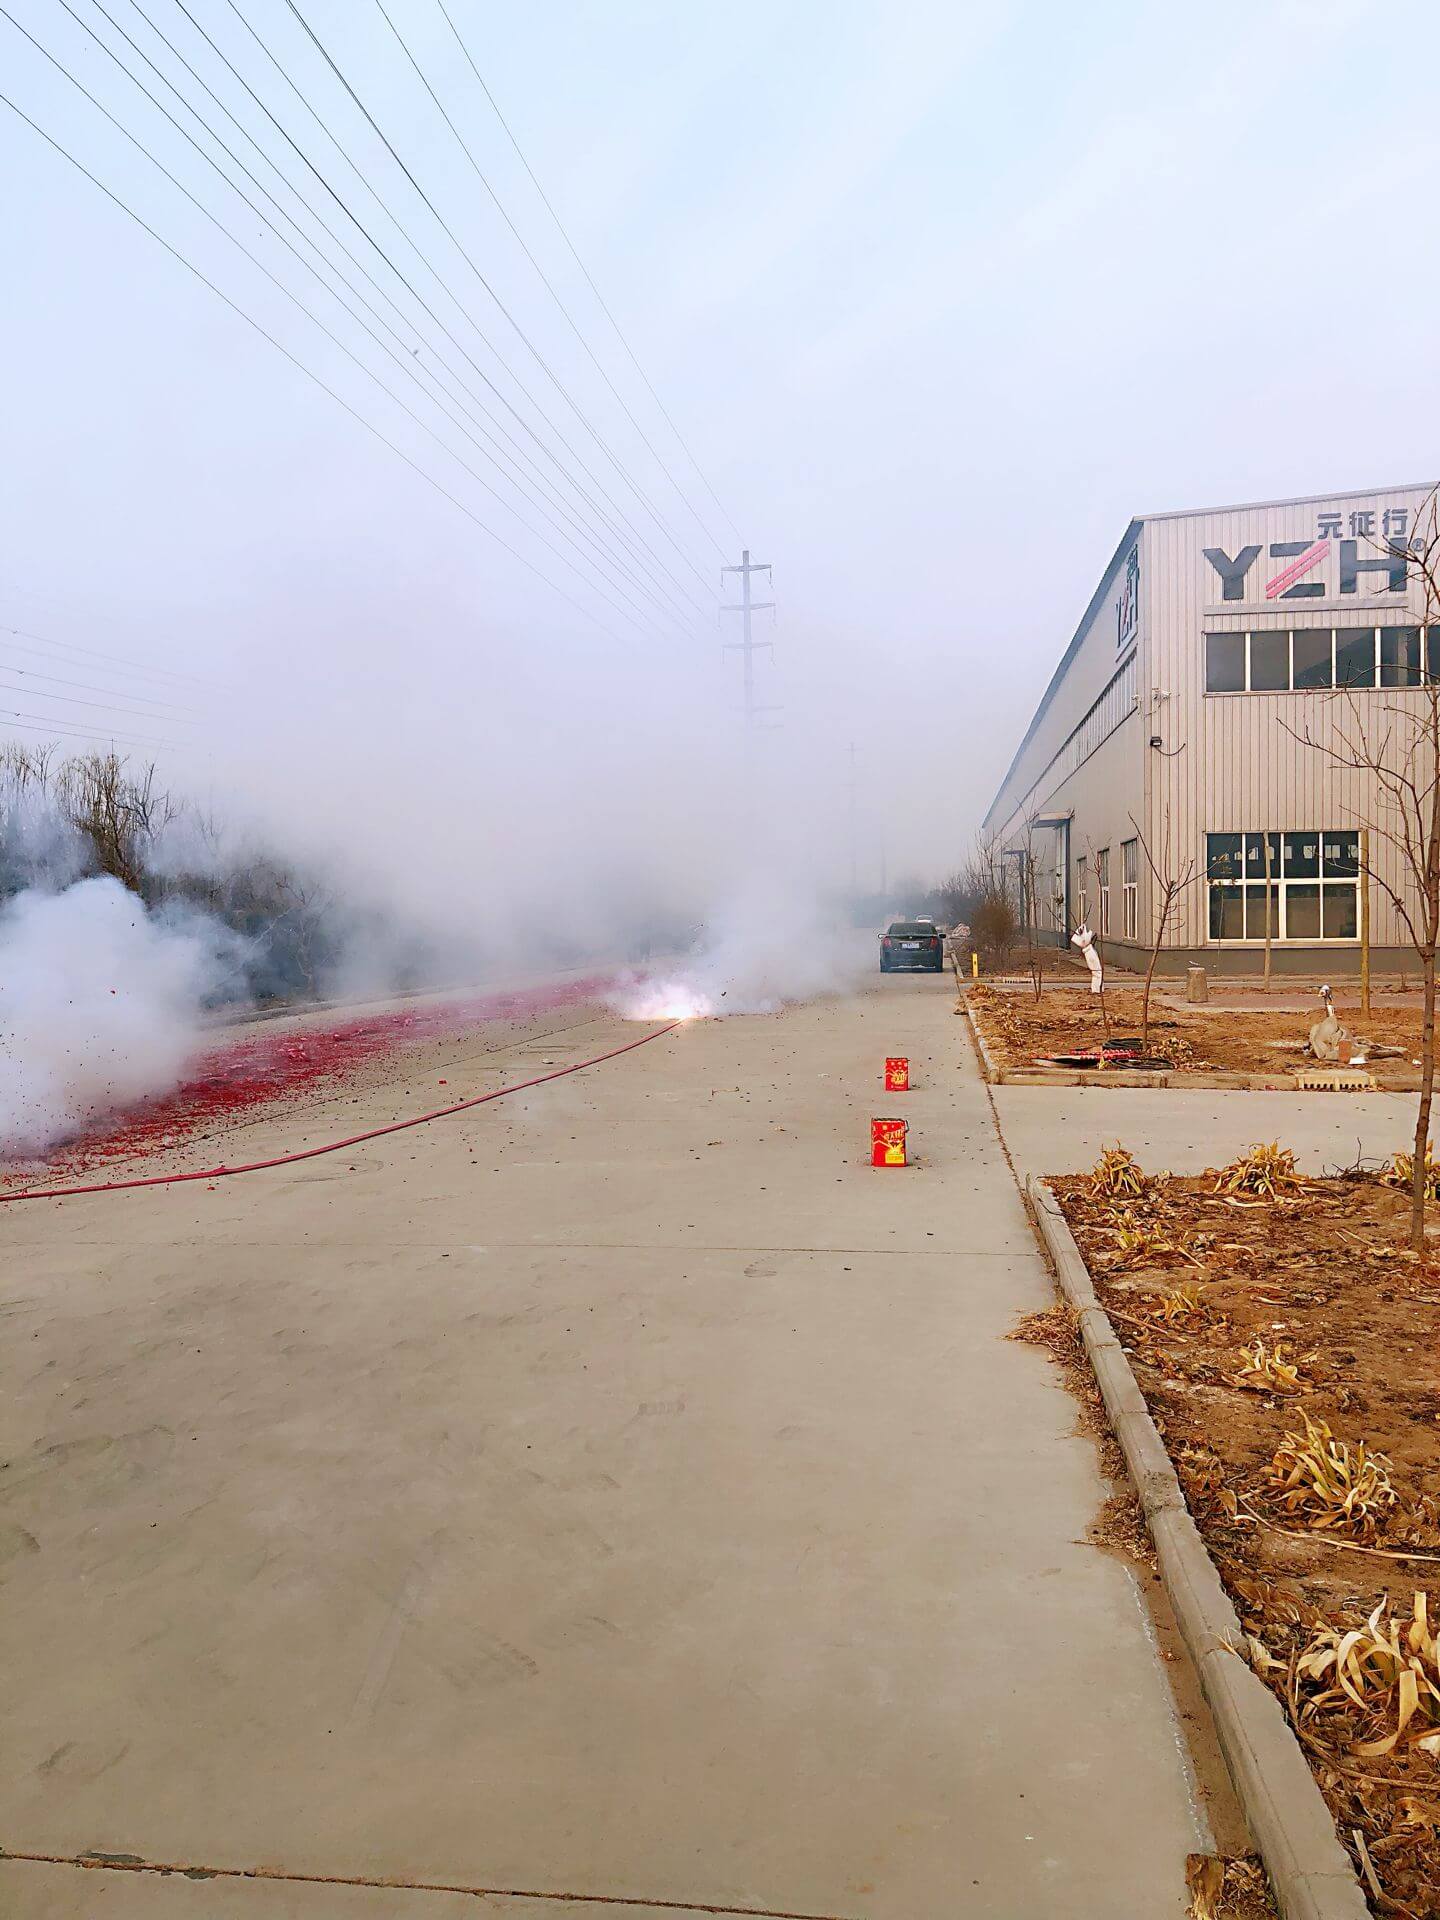 The First Working Day Of Jinan YZH Machinery Equipment Company Of 2019